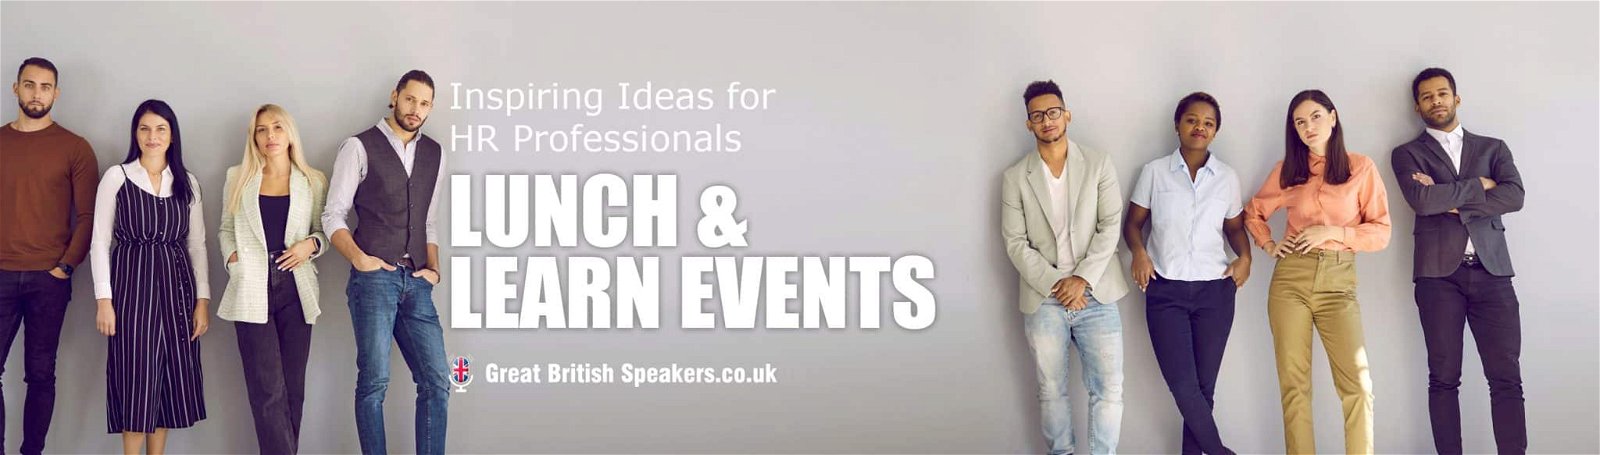 Inspirational Lunch and Learn events speaker Development ideas at Great British Speakers